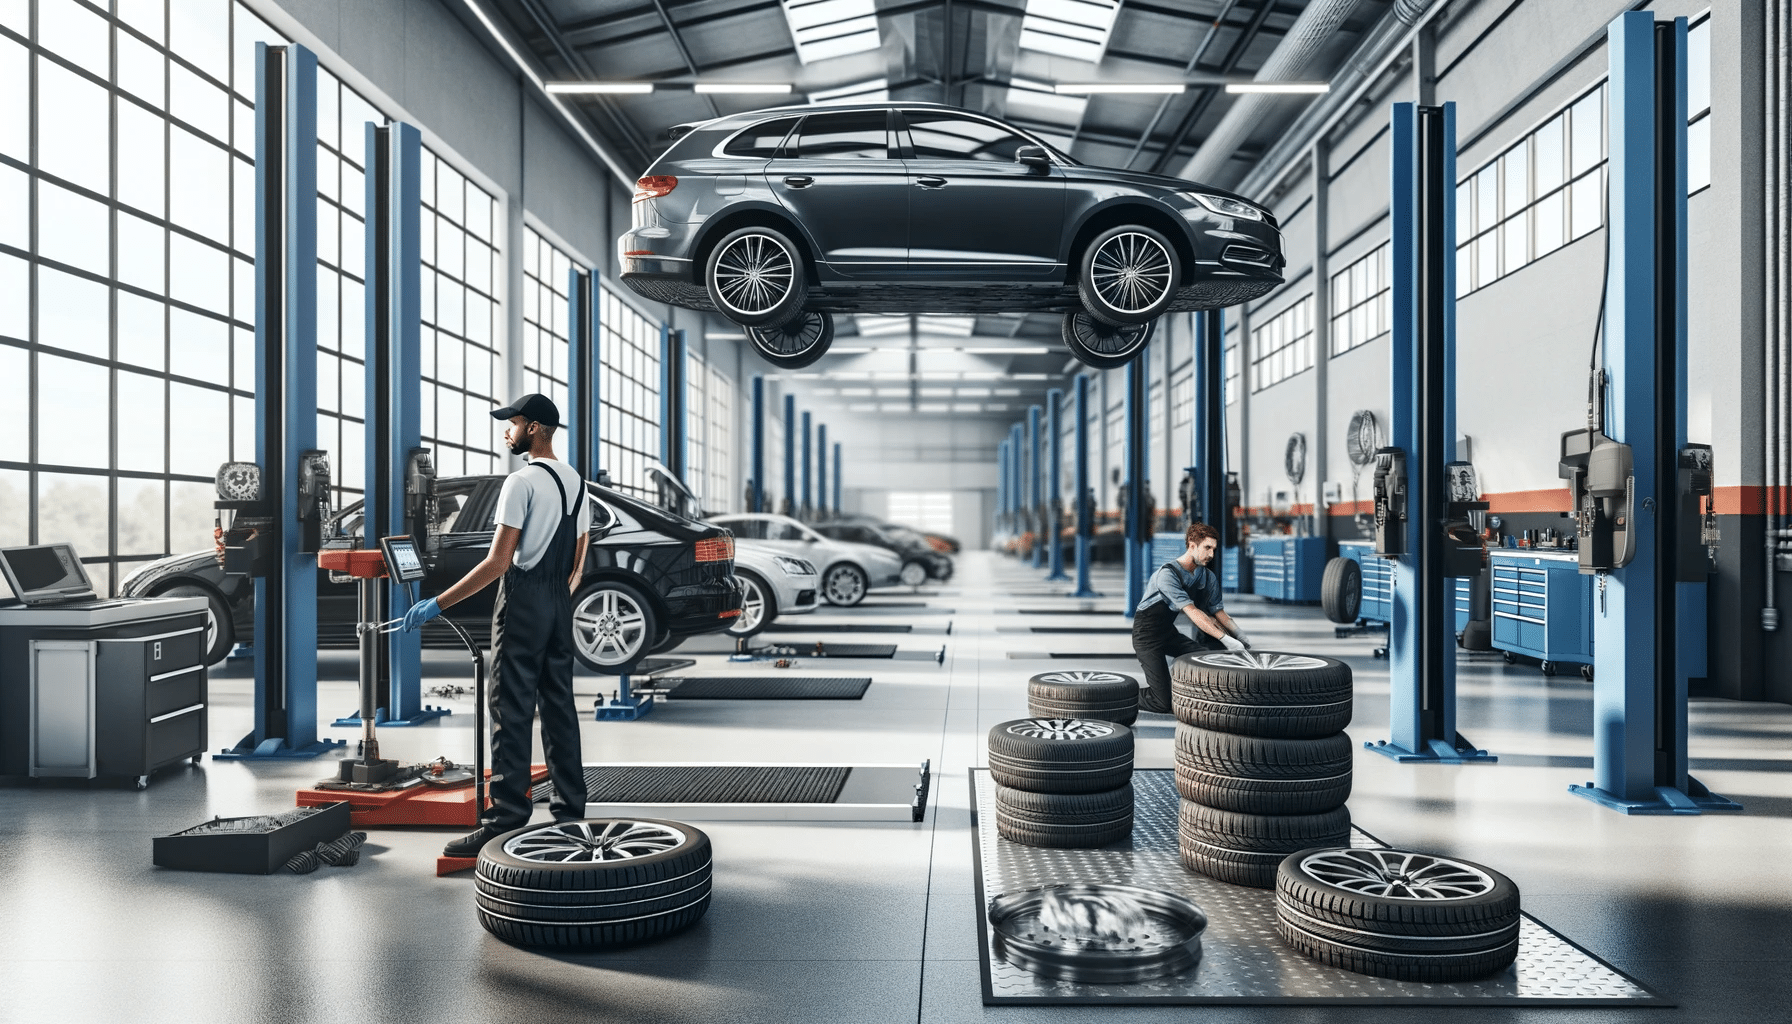 A-modern-clean-auto-repair-shop-with-multiple-car-lifts-technicians-working-on-various-vehicles-focusing-on-tire-services